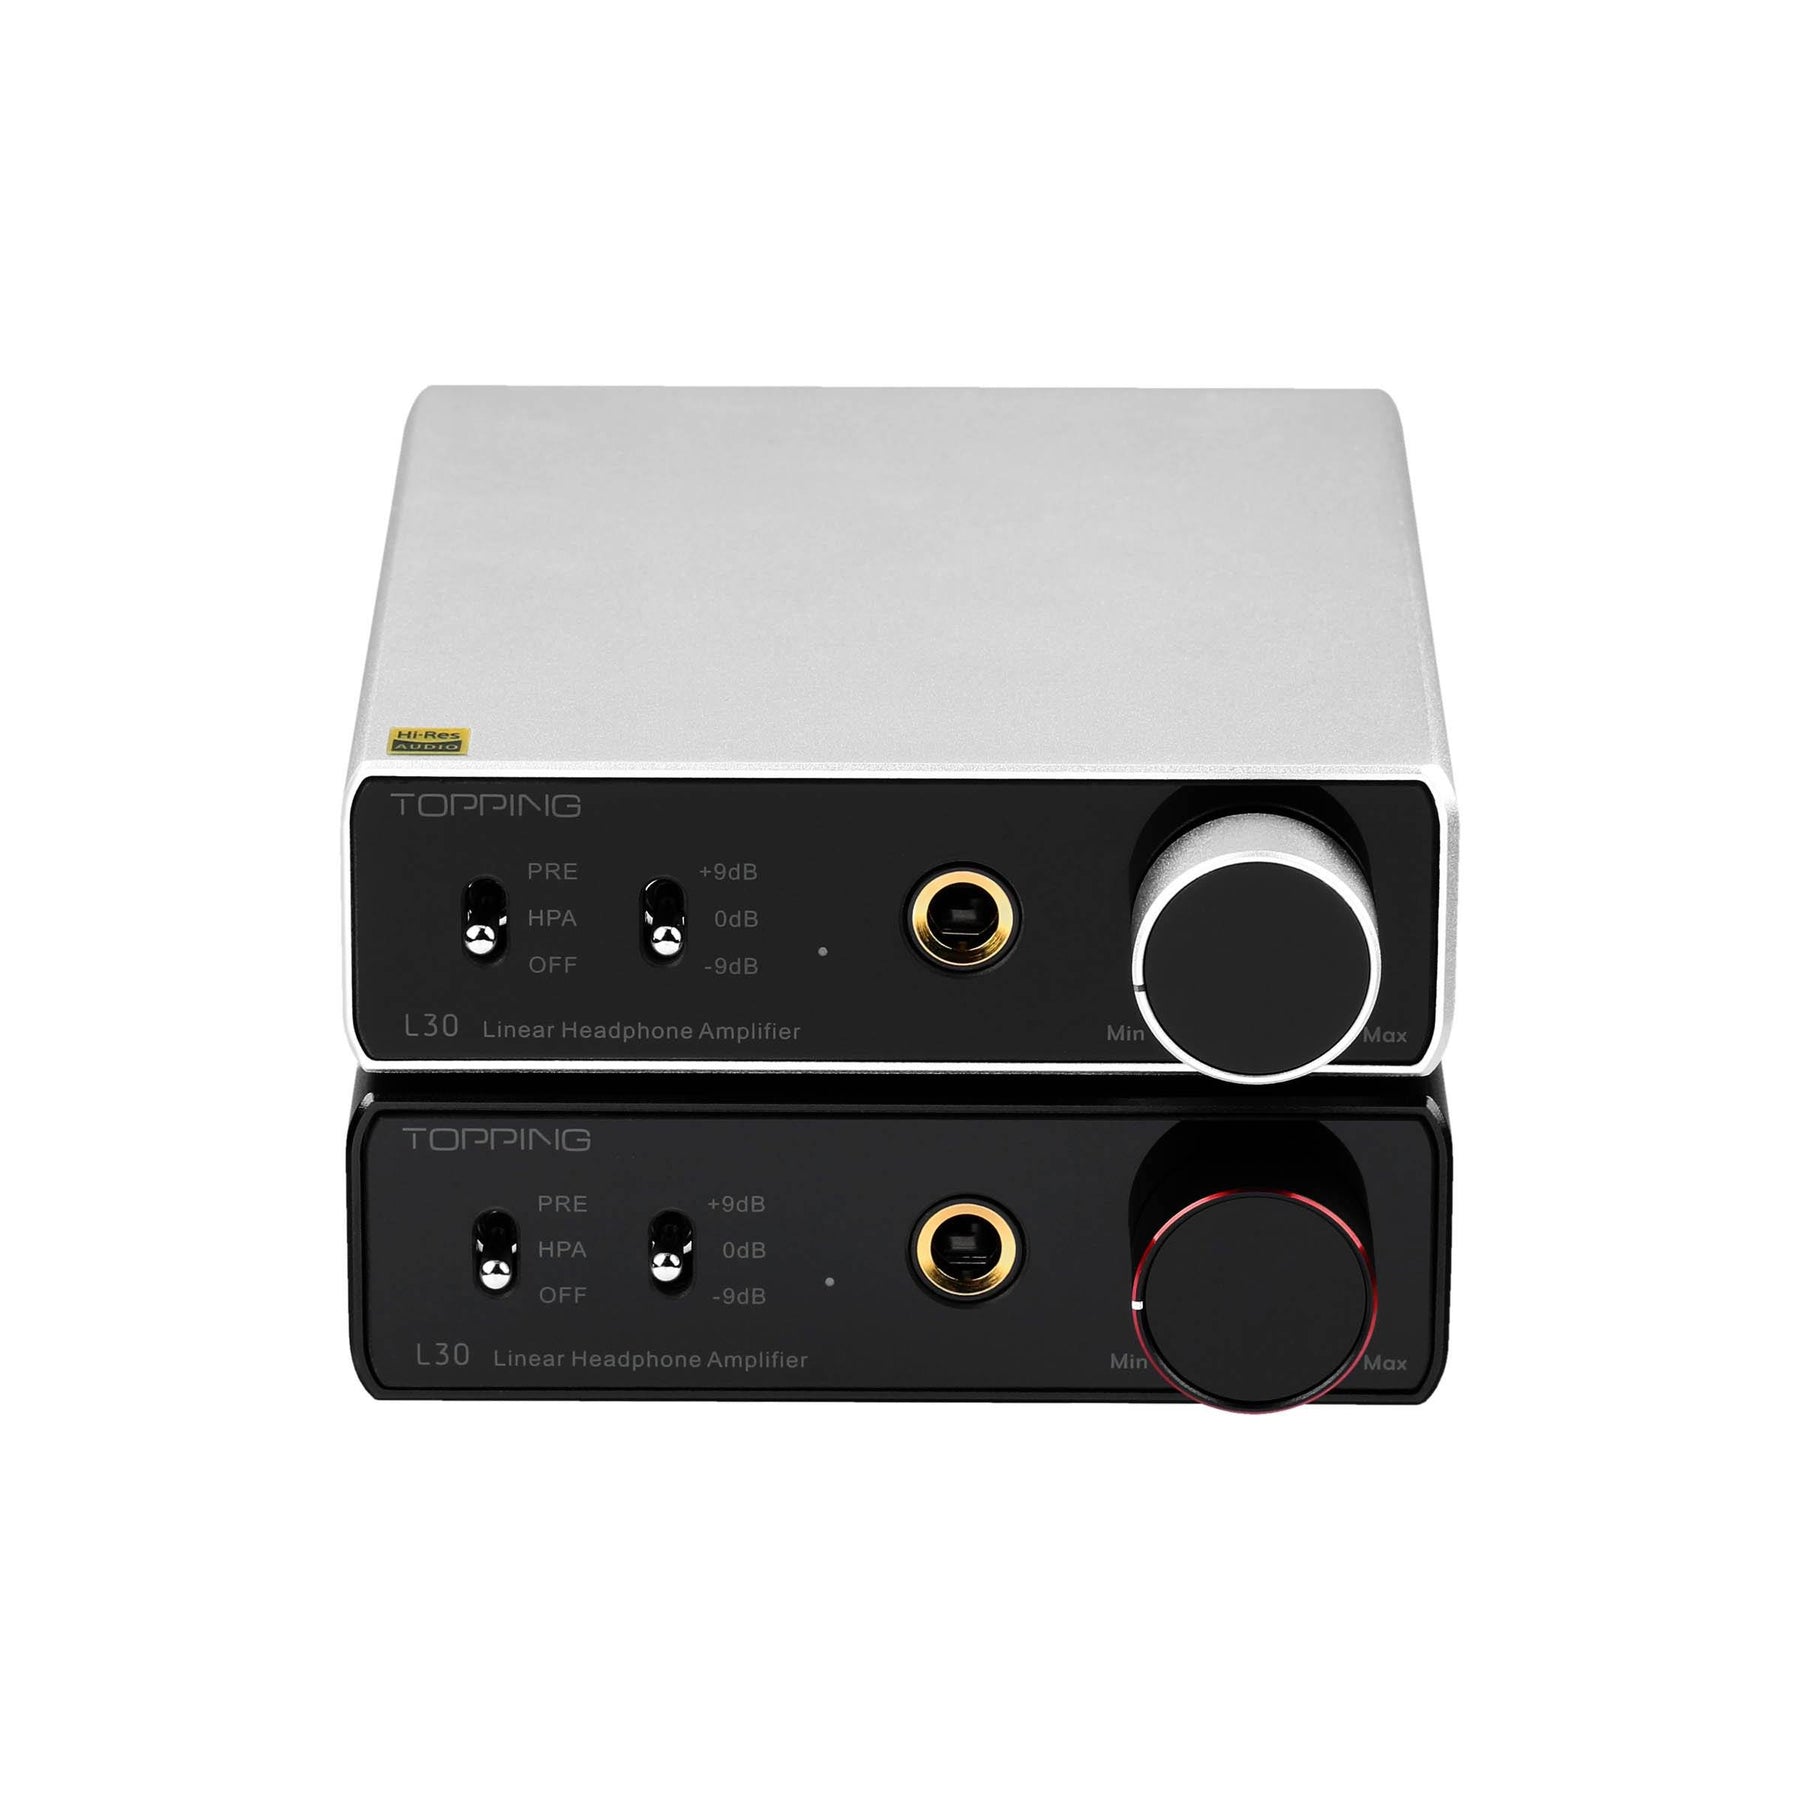 TOPPING Launches L30 Headphone Amplifier